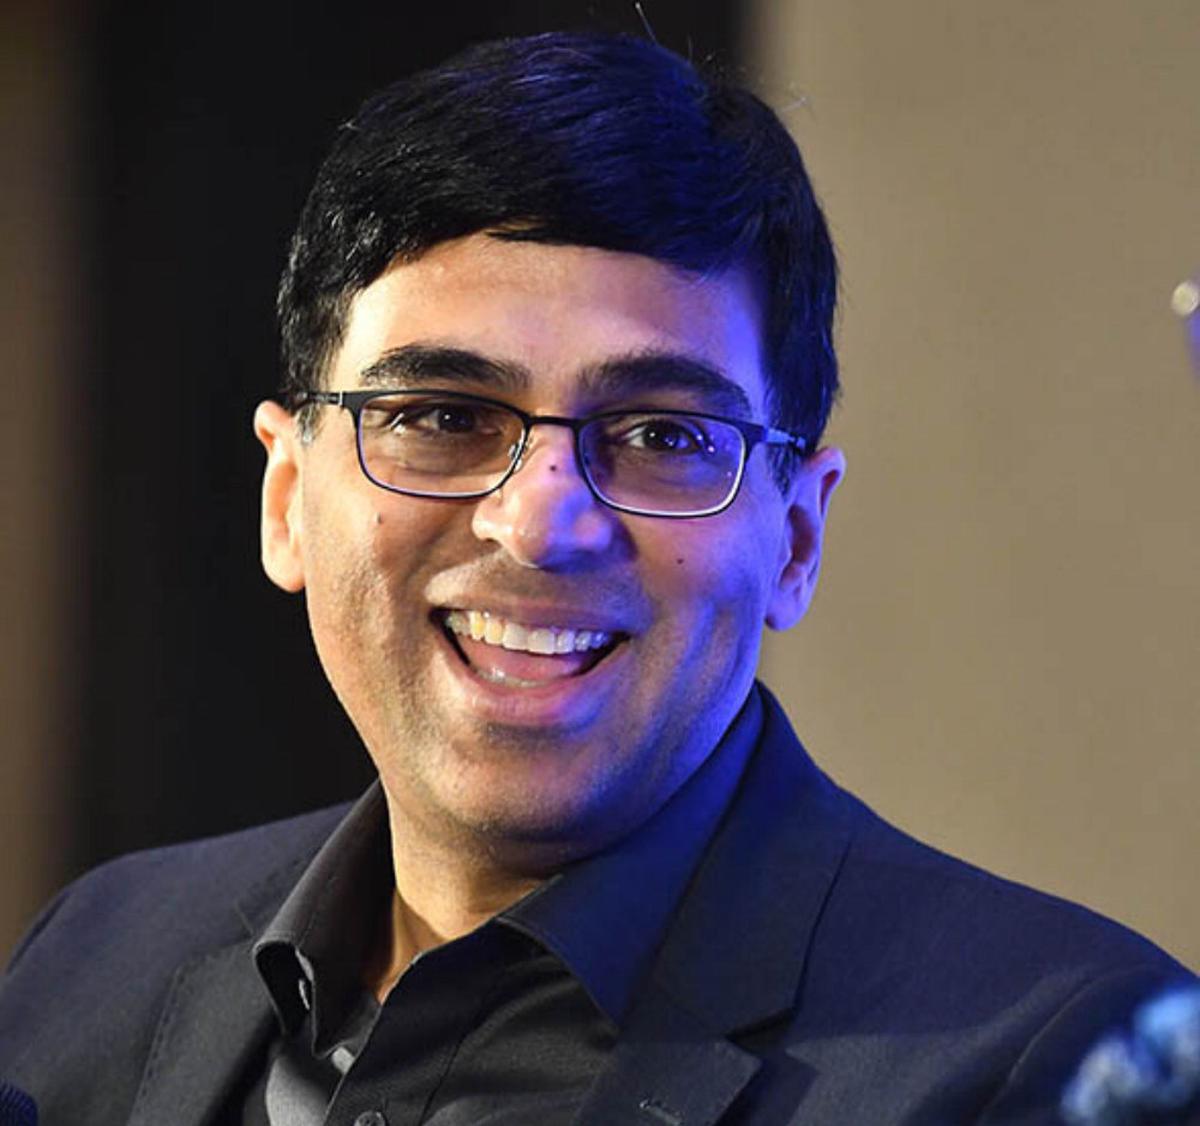 Legends of Chess: V for Vishy as he gets first win✓